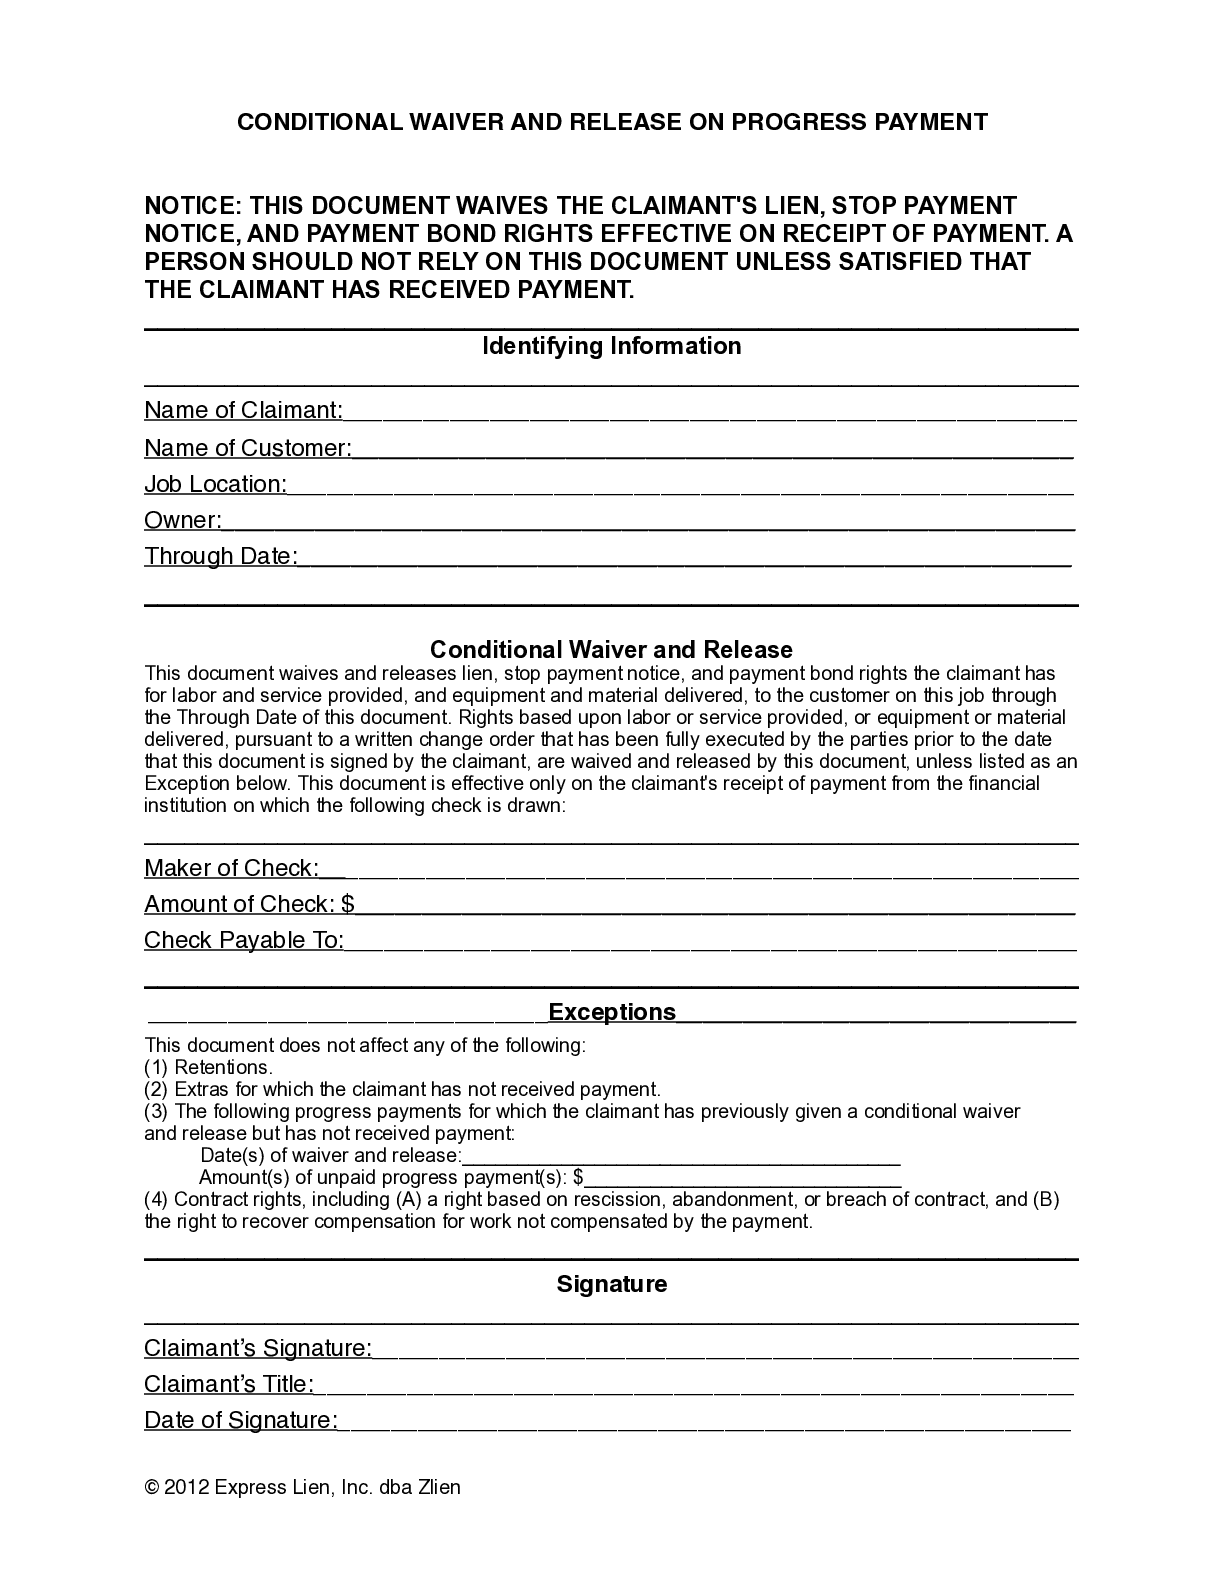 New York Partial Conditional Lien Waiver Form - free from